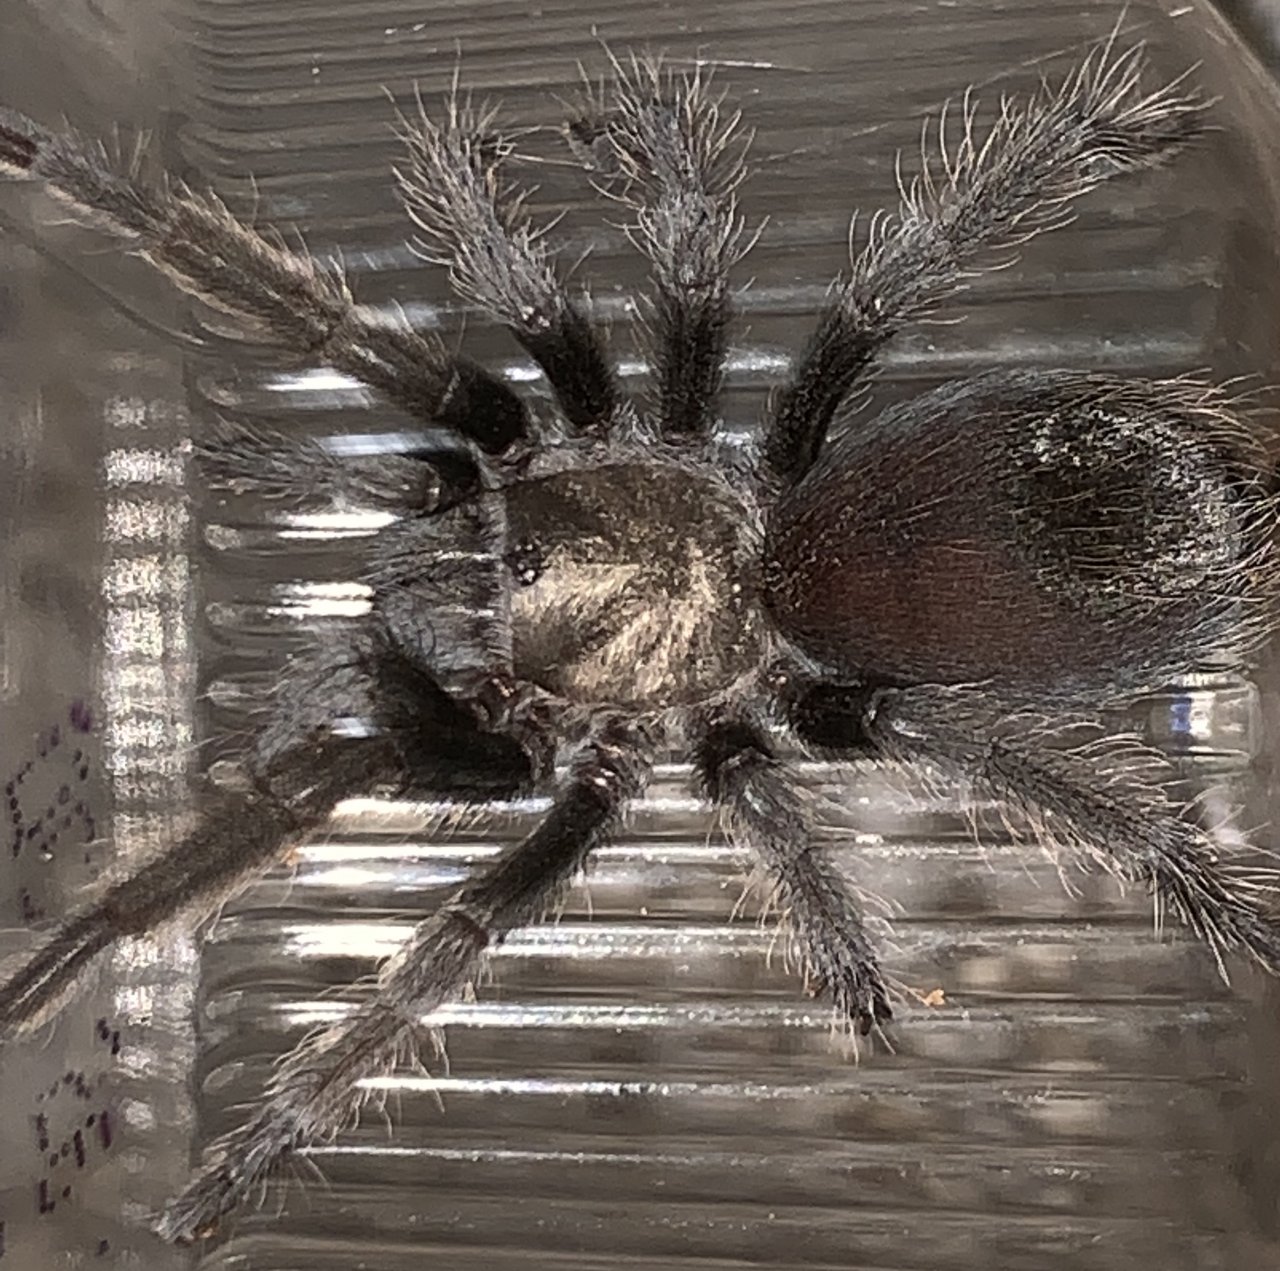 Is this a Aphonopelma eutylenum or Aphonopelma Anax?